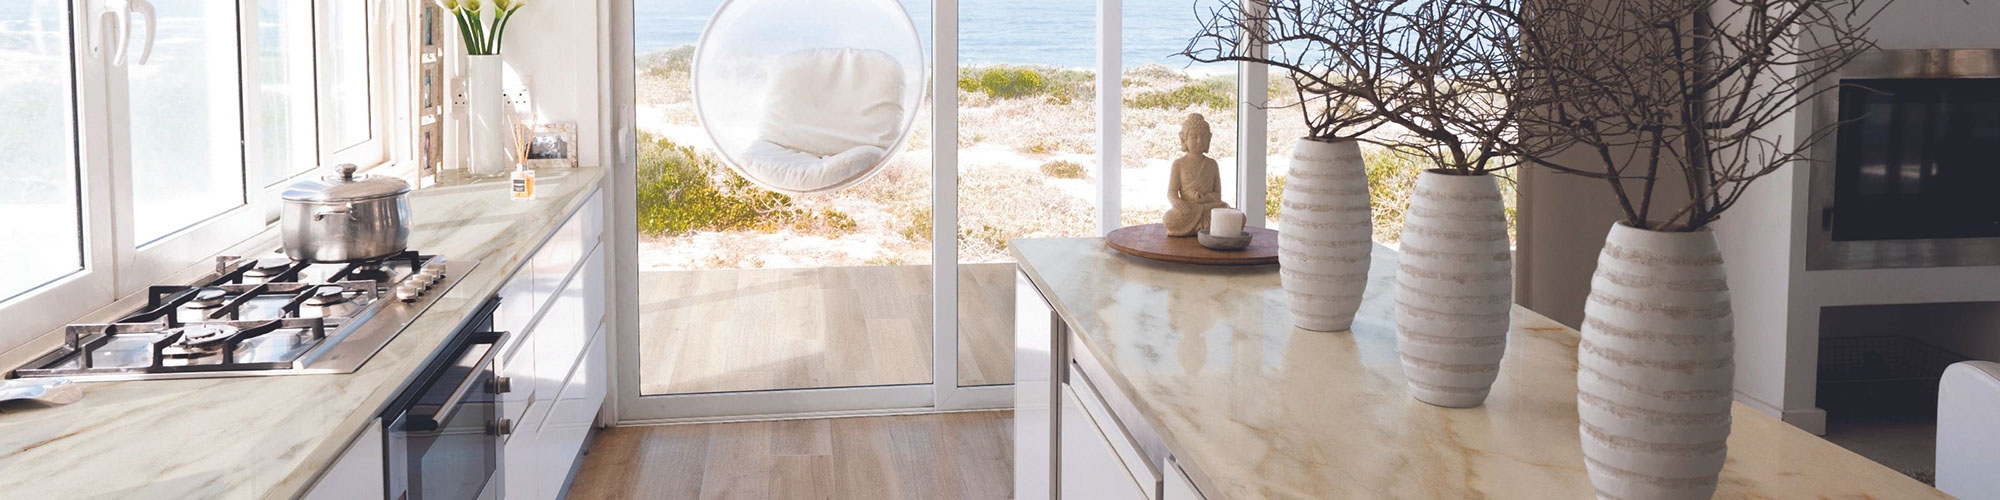 Long kitchen island with beige quartzite countertop, holding large vases with dried twigs, and view of beach & ocean.